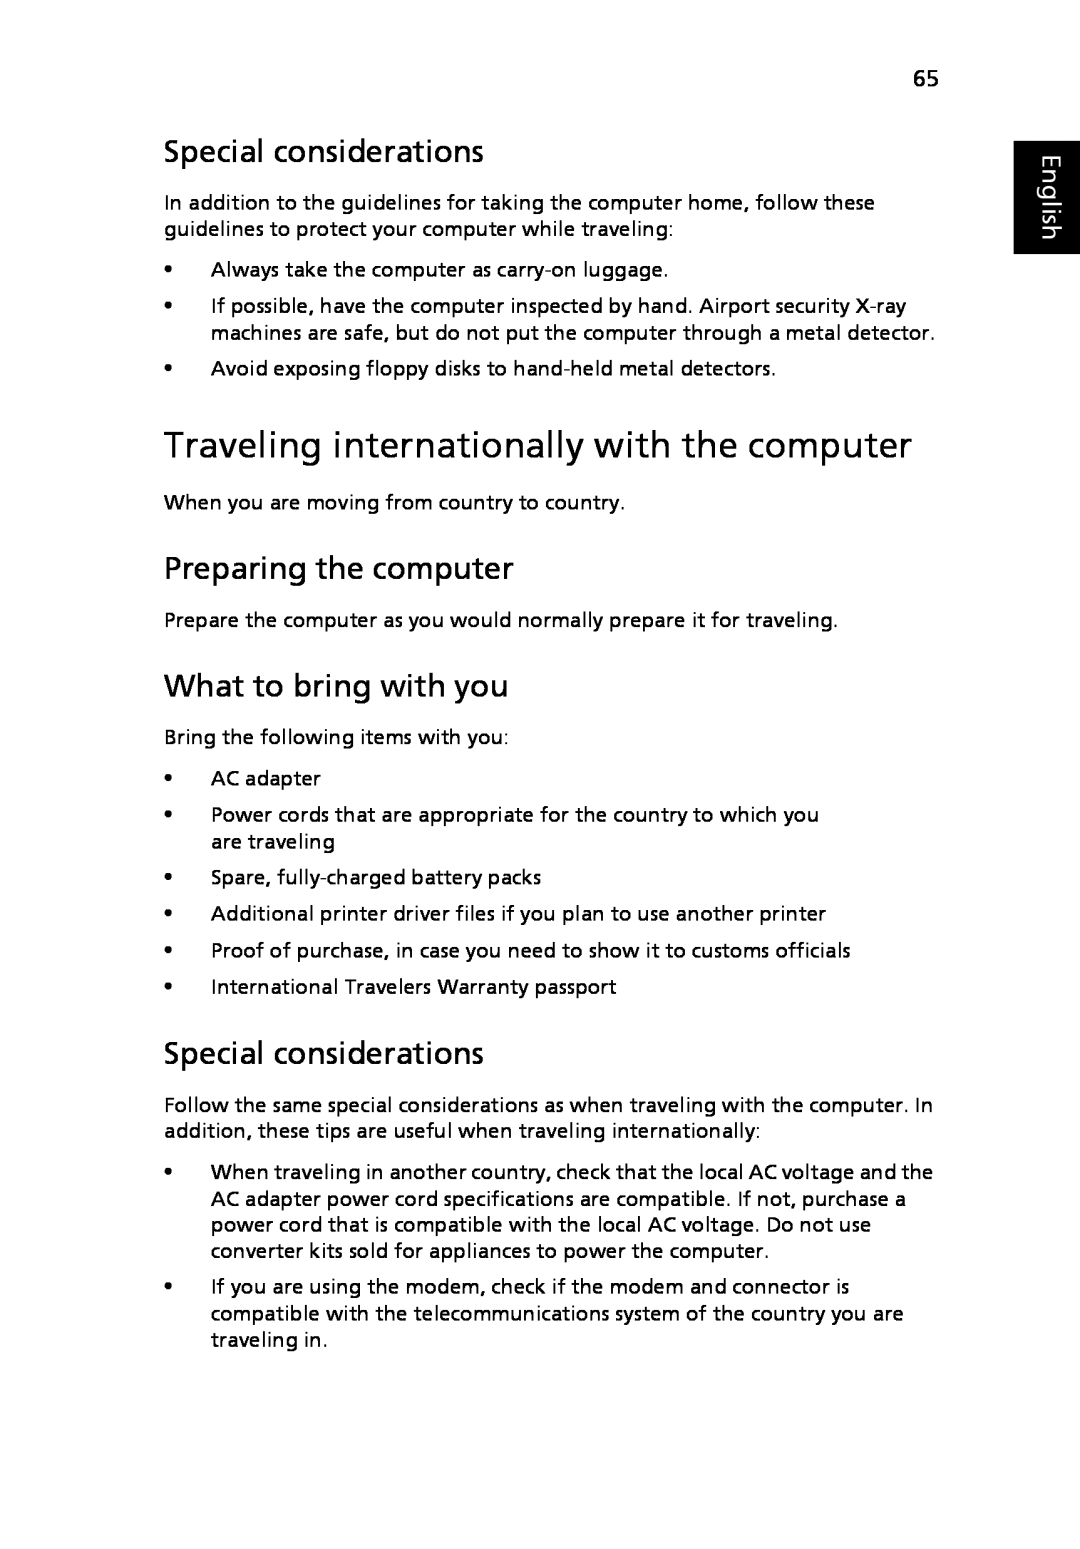 Acer 5010 Series Traveling internationally with the computer, What to bring with you, Special considerations, English 